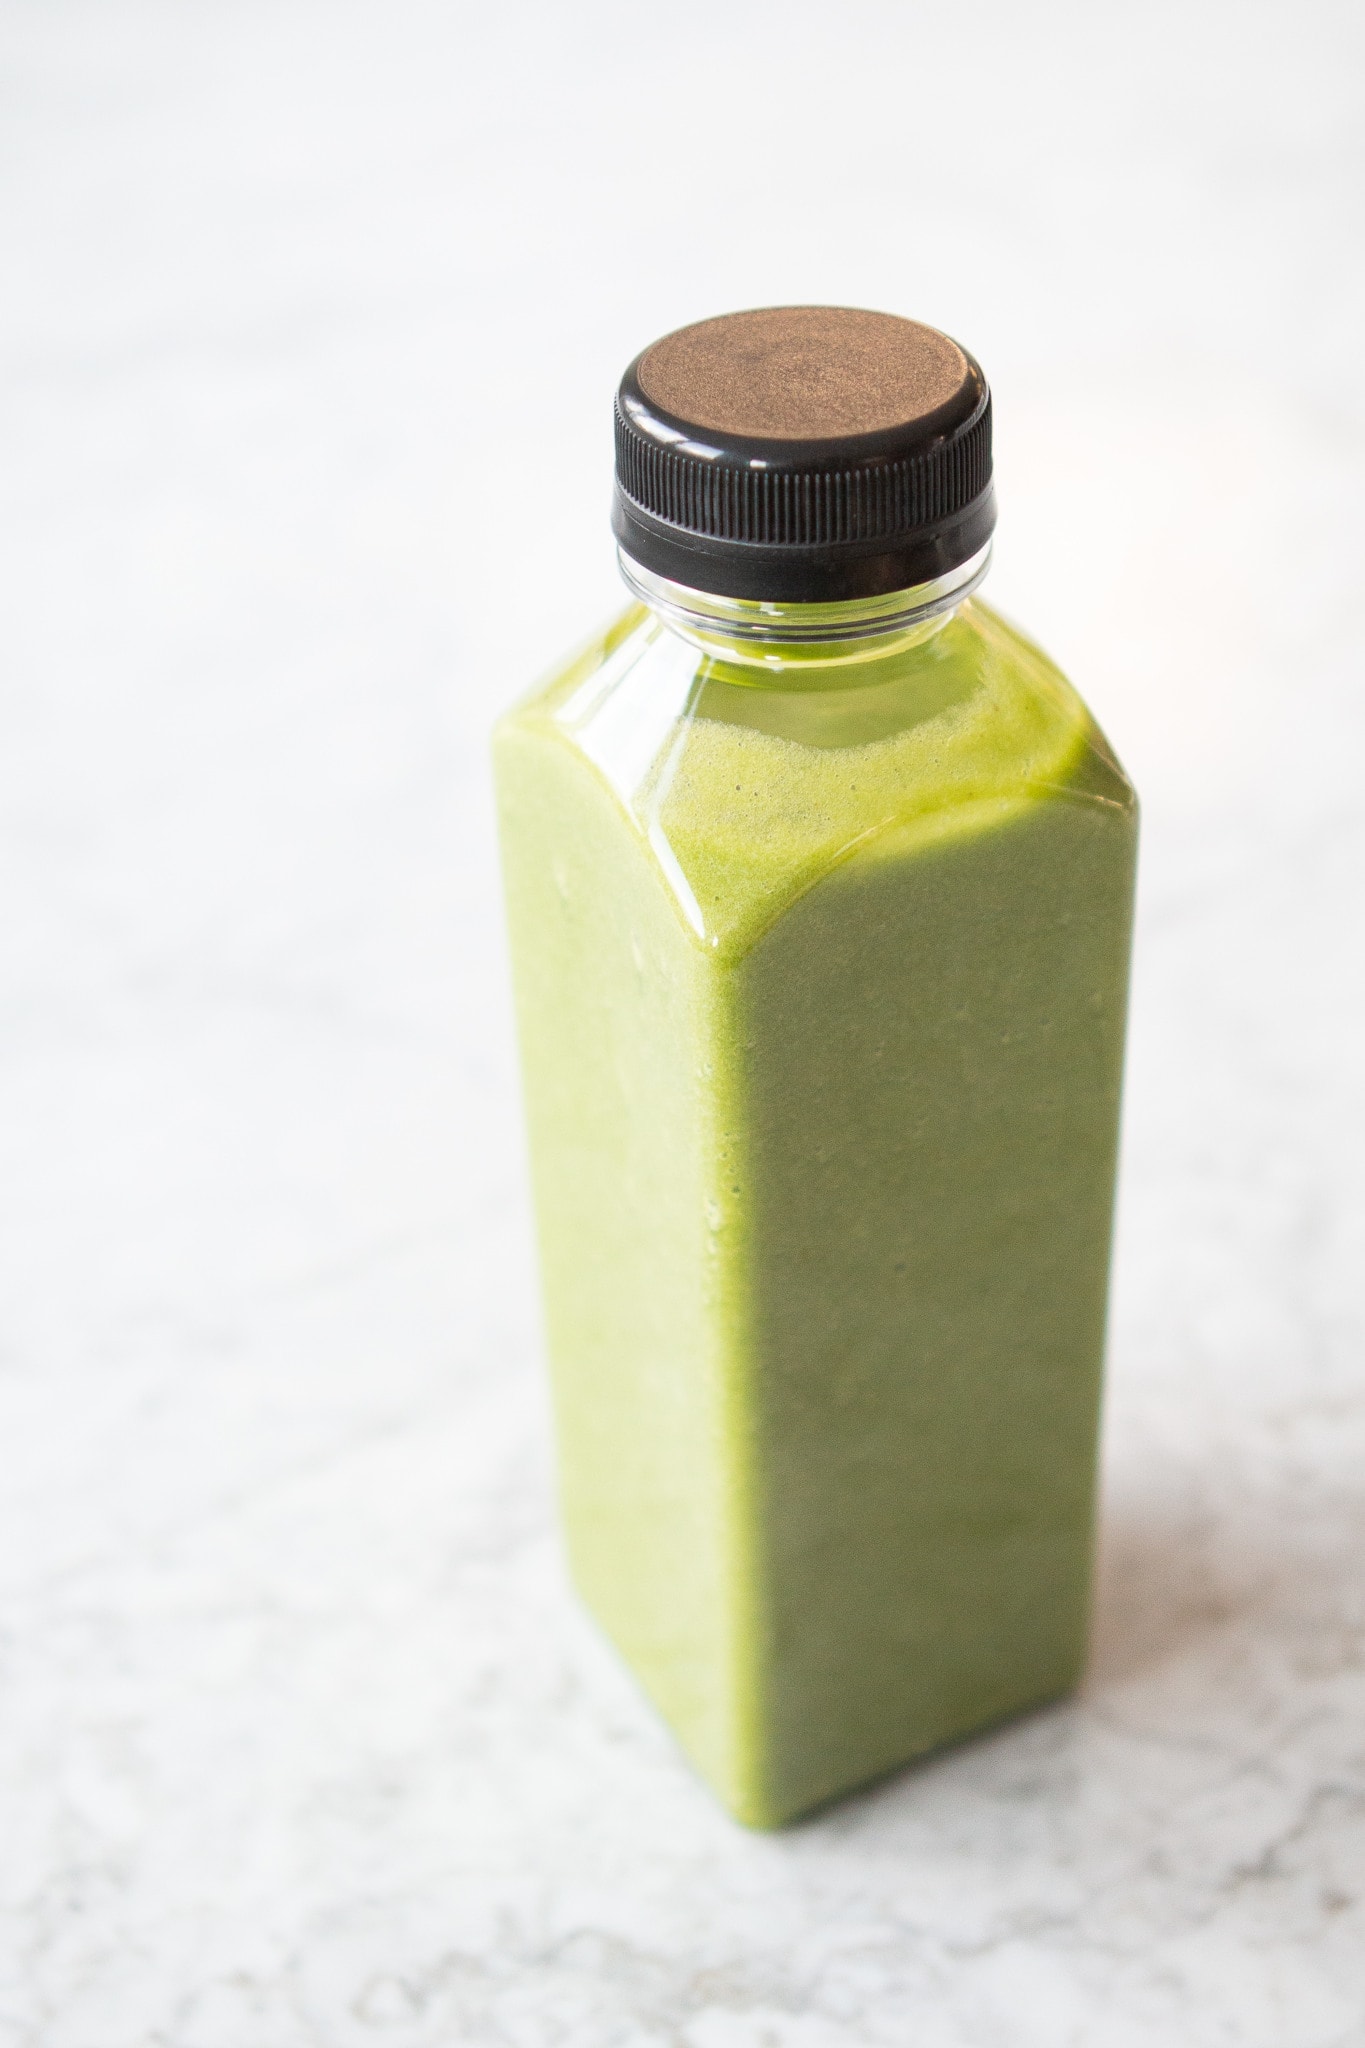 Our green juice recipe for the mornings